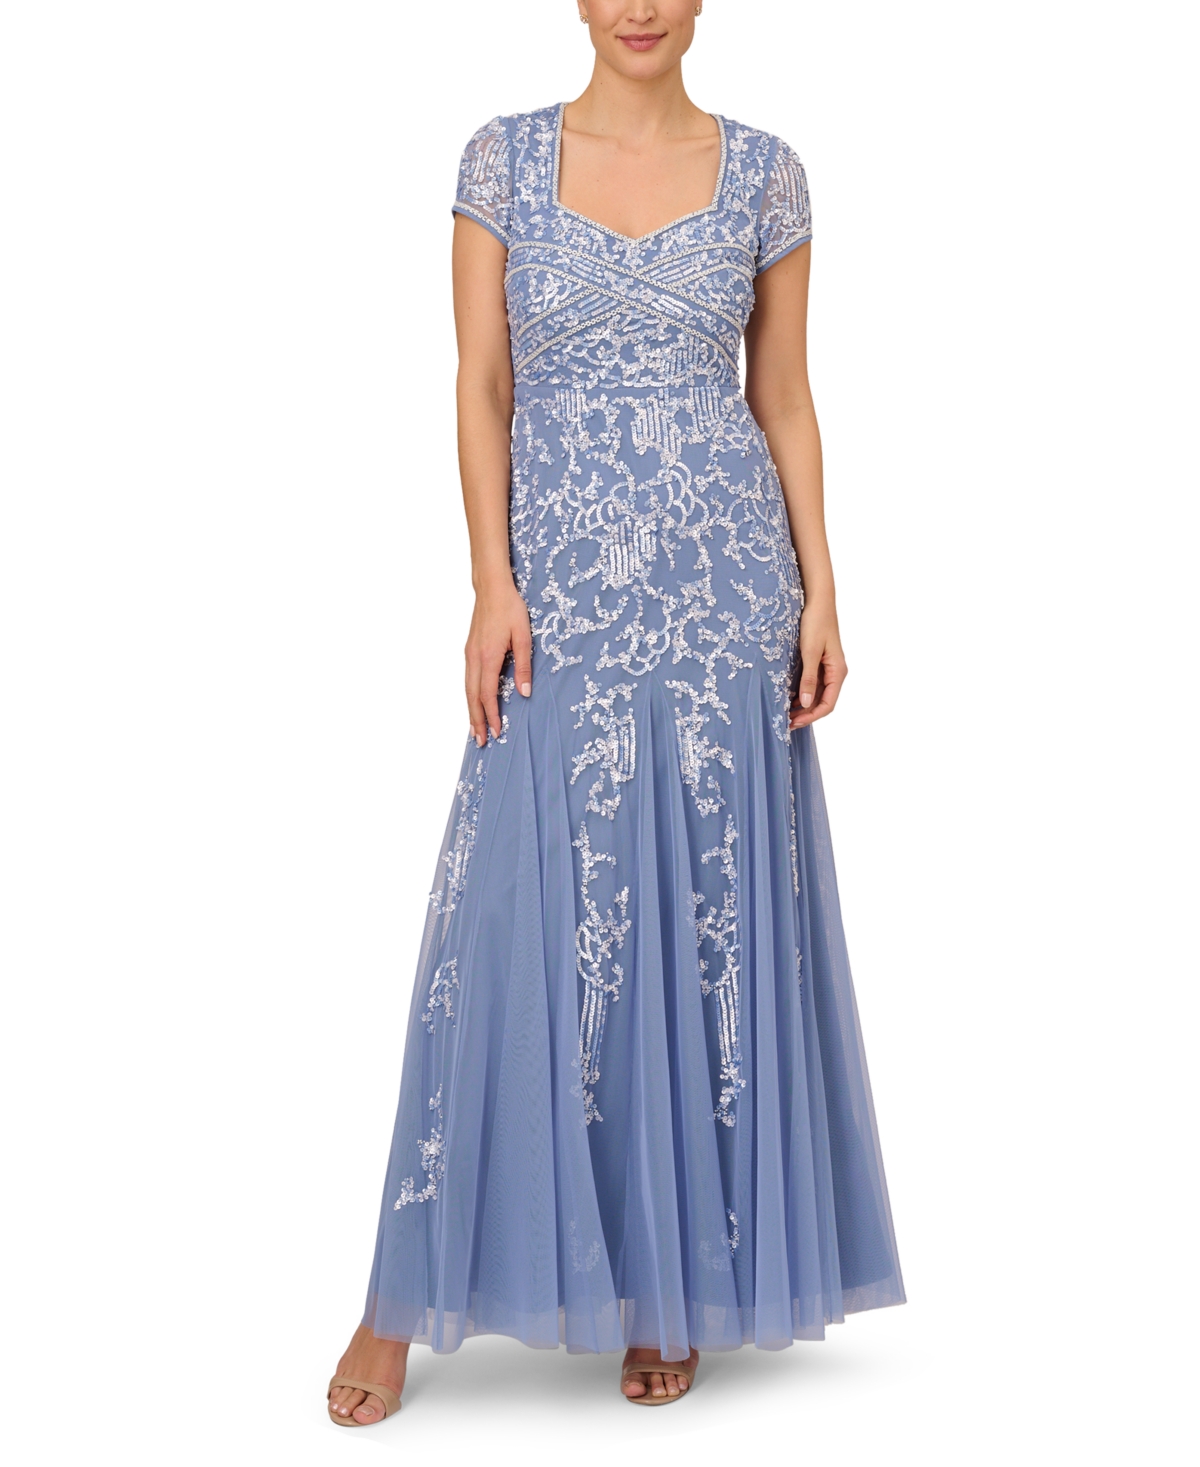 1930s Clothing and Fashion for Women Adrianna Papell Embellished Godet Gown - French Blue $349.00 AT vintagedancer.com